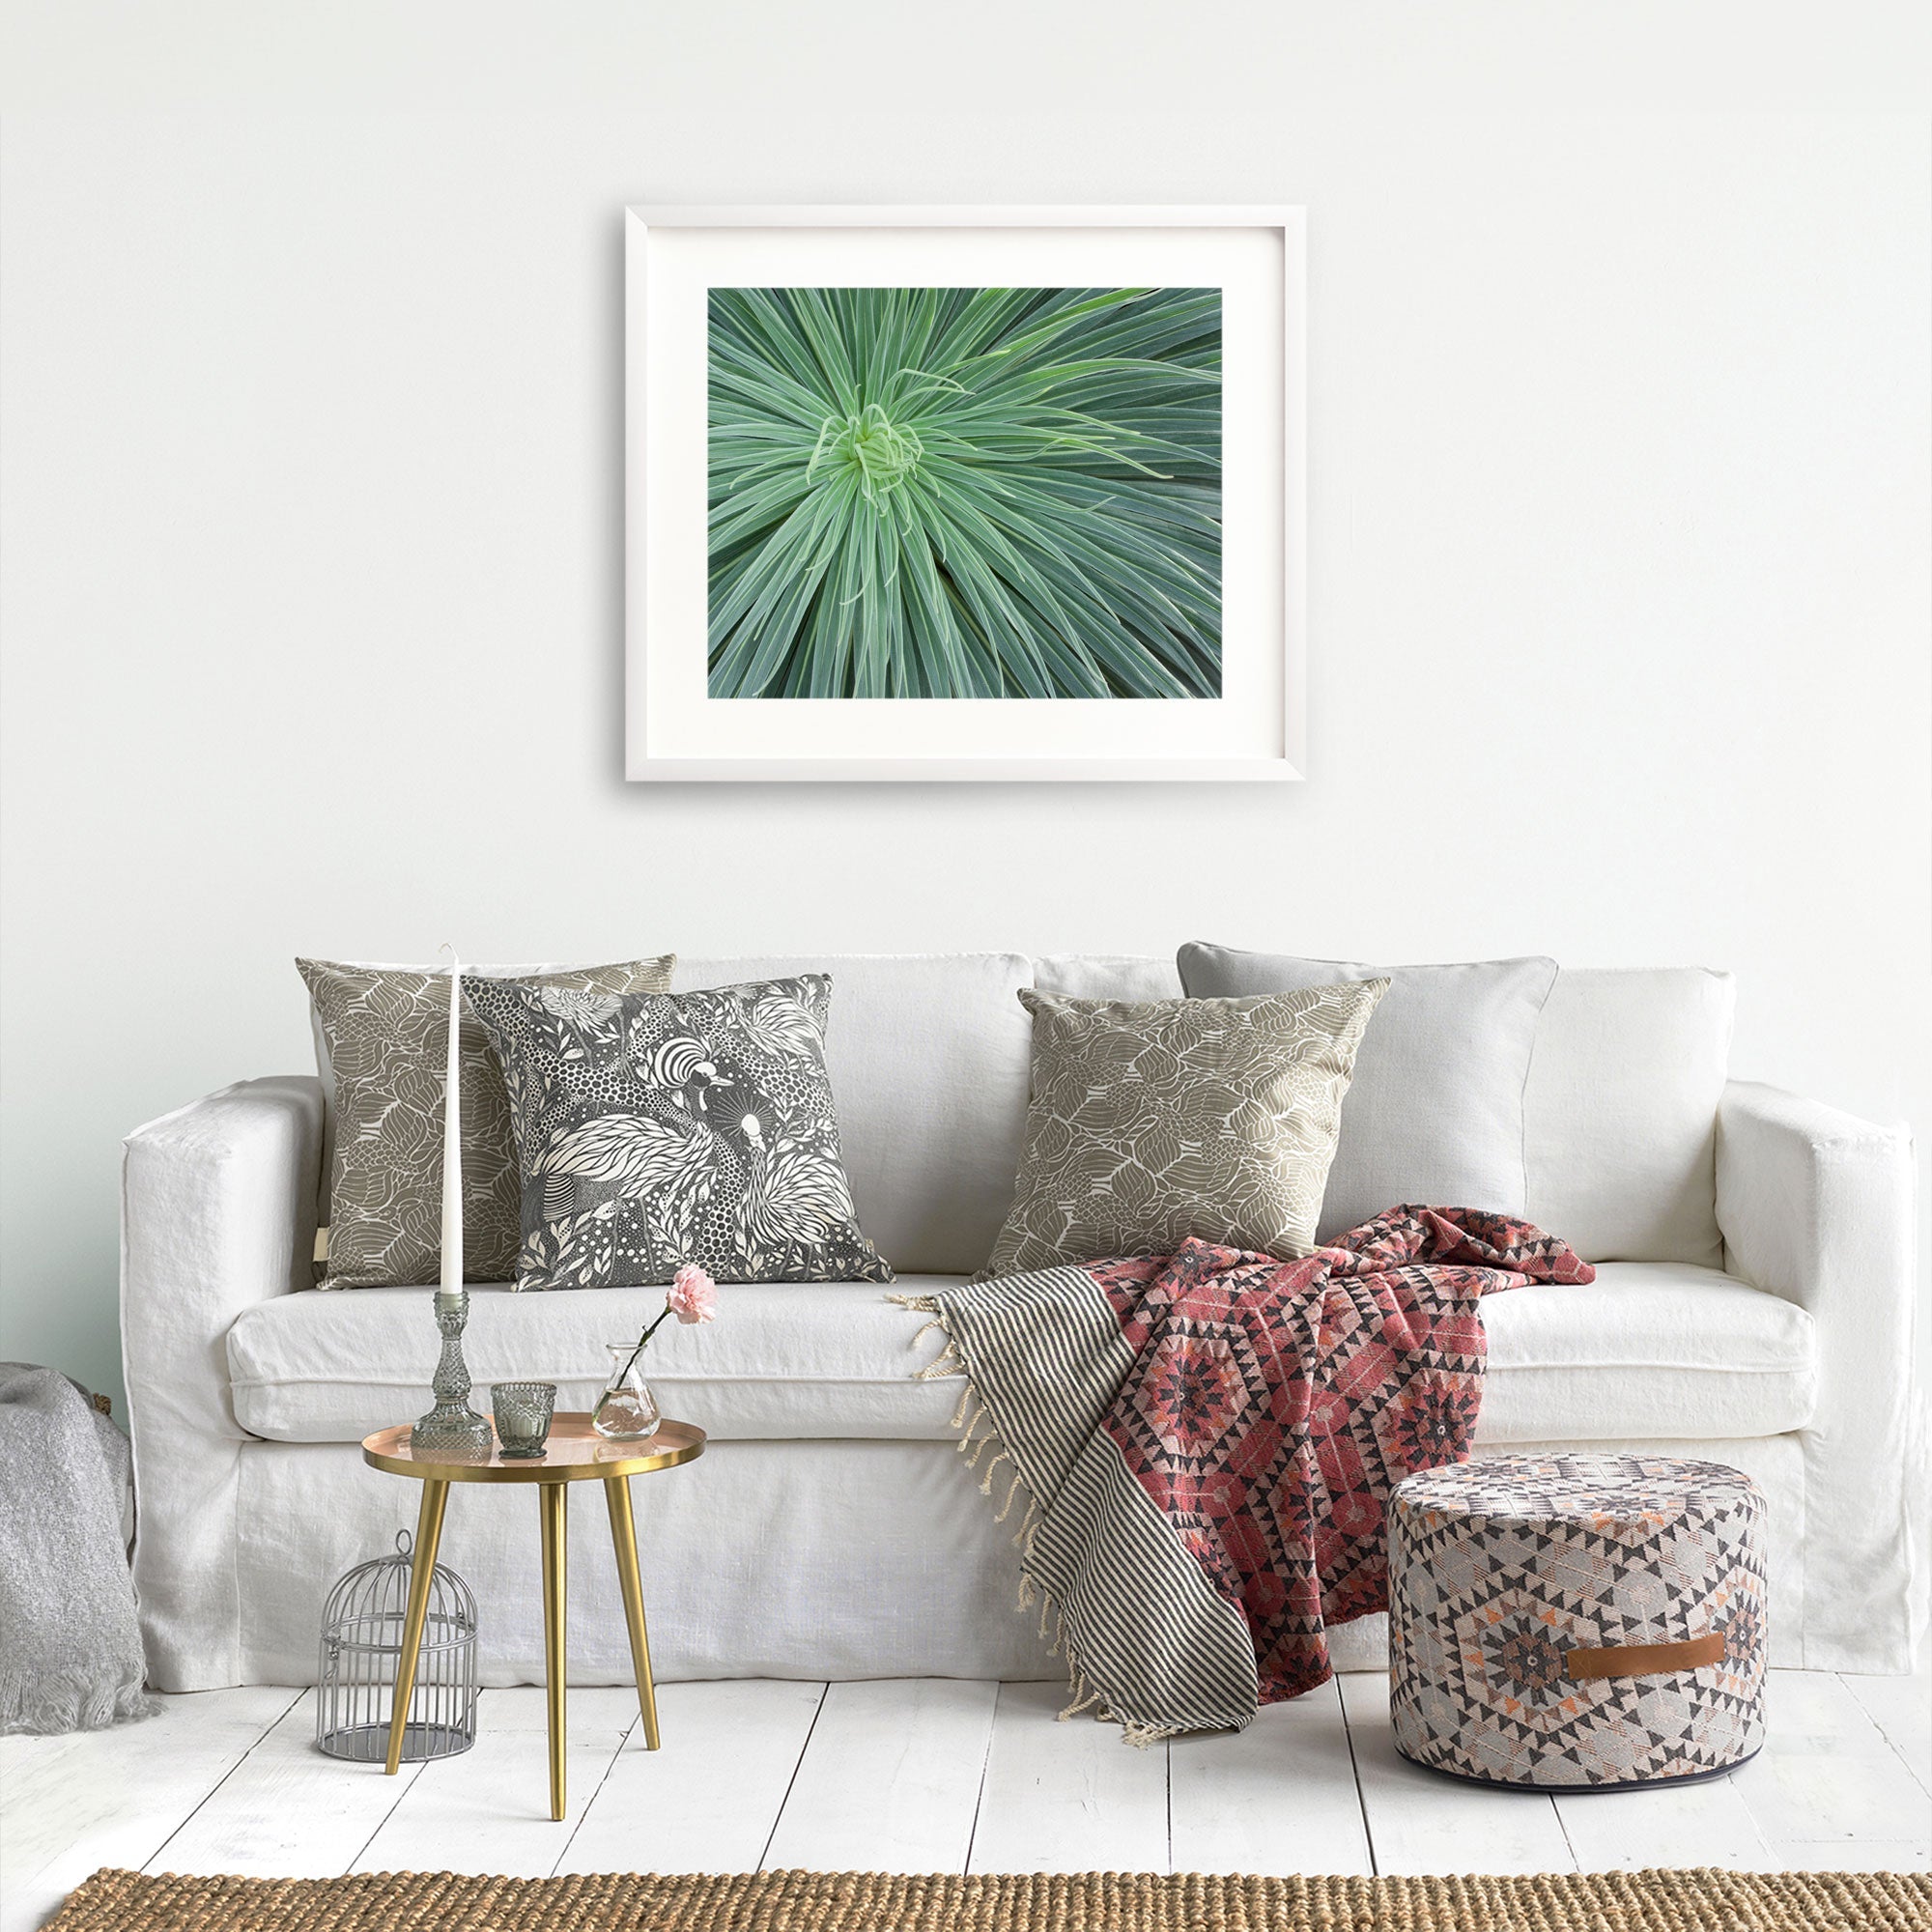 A cozy living room with a white sofa adorned with patterned throw pillows, a knitted blanket, and Abstract Green Botanical Print, 'Desert Fireworks' prints above. A small round table and decorative items complete the serene décor. (Brand Name: Offley Green)